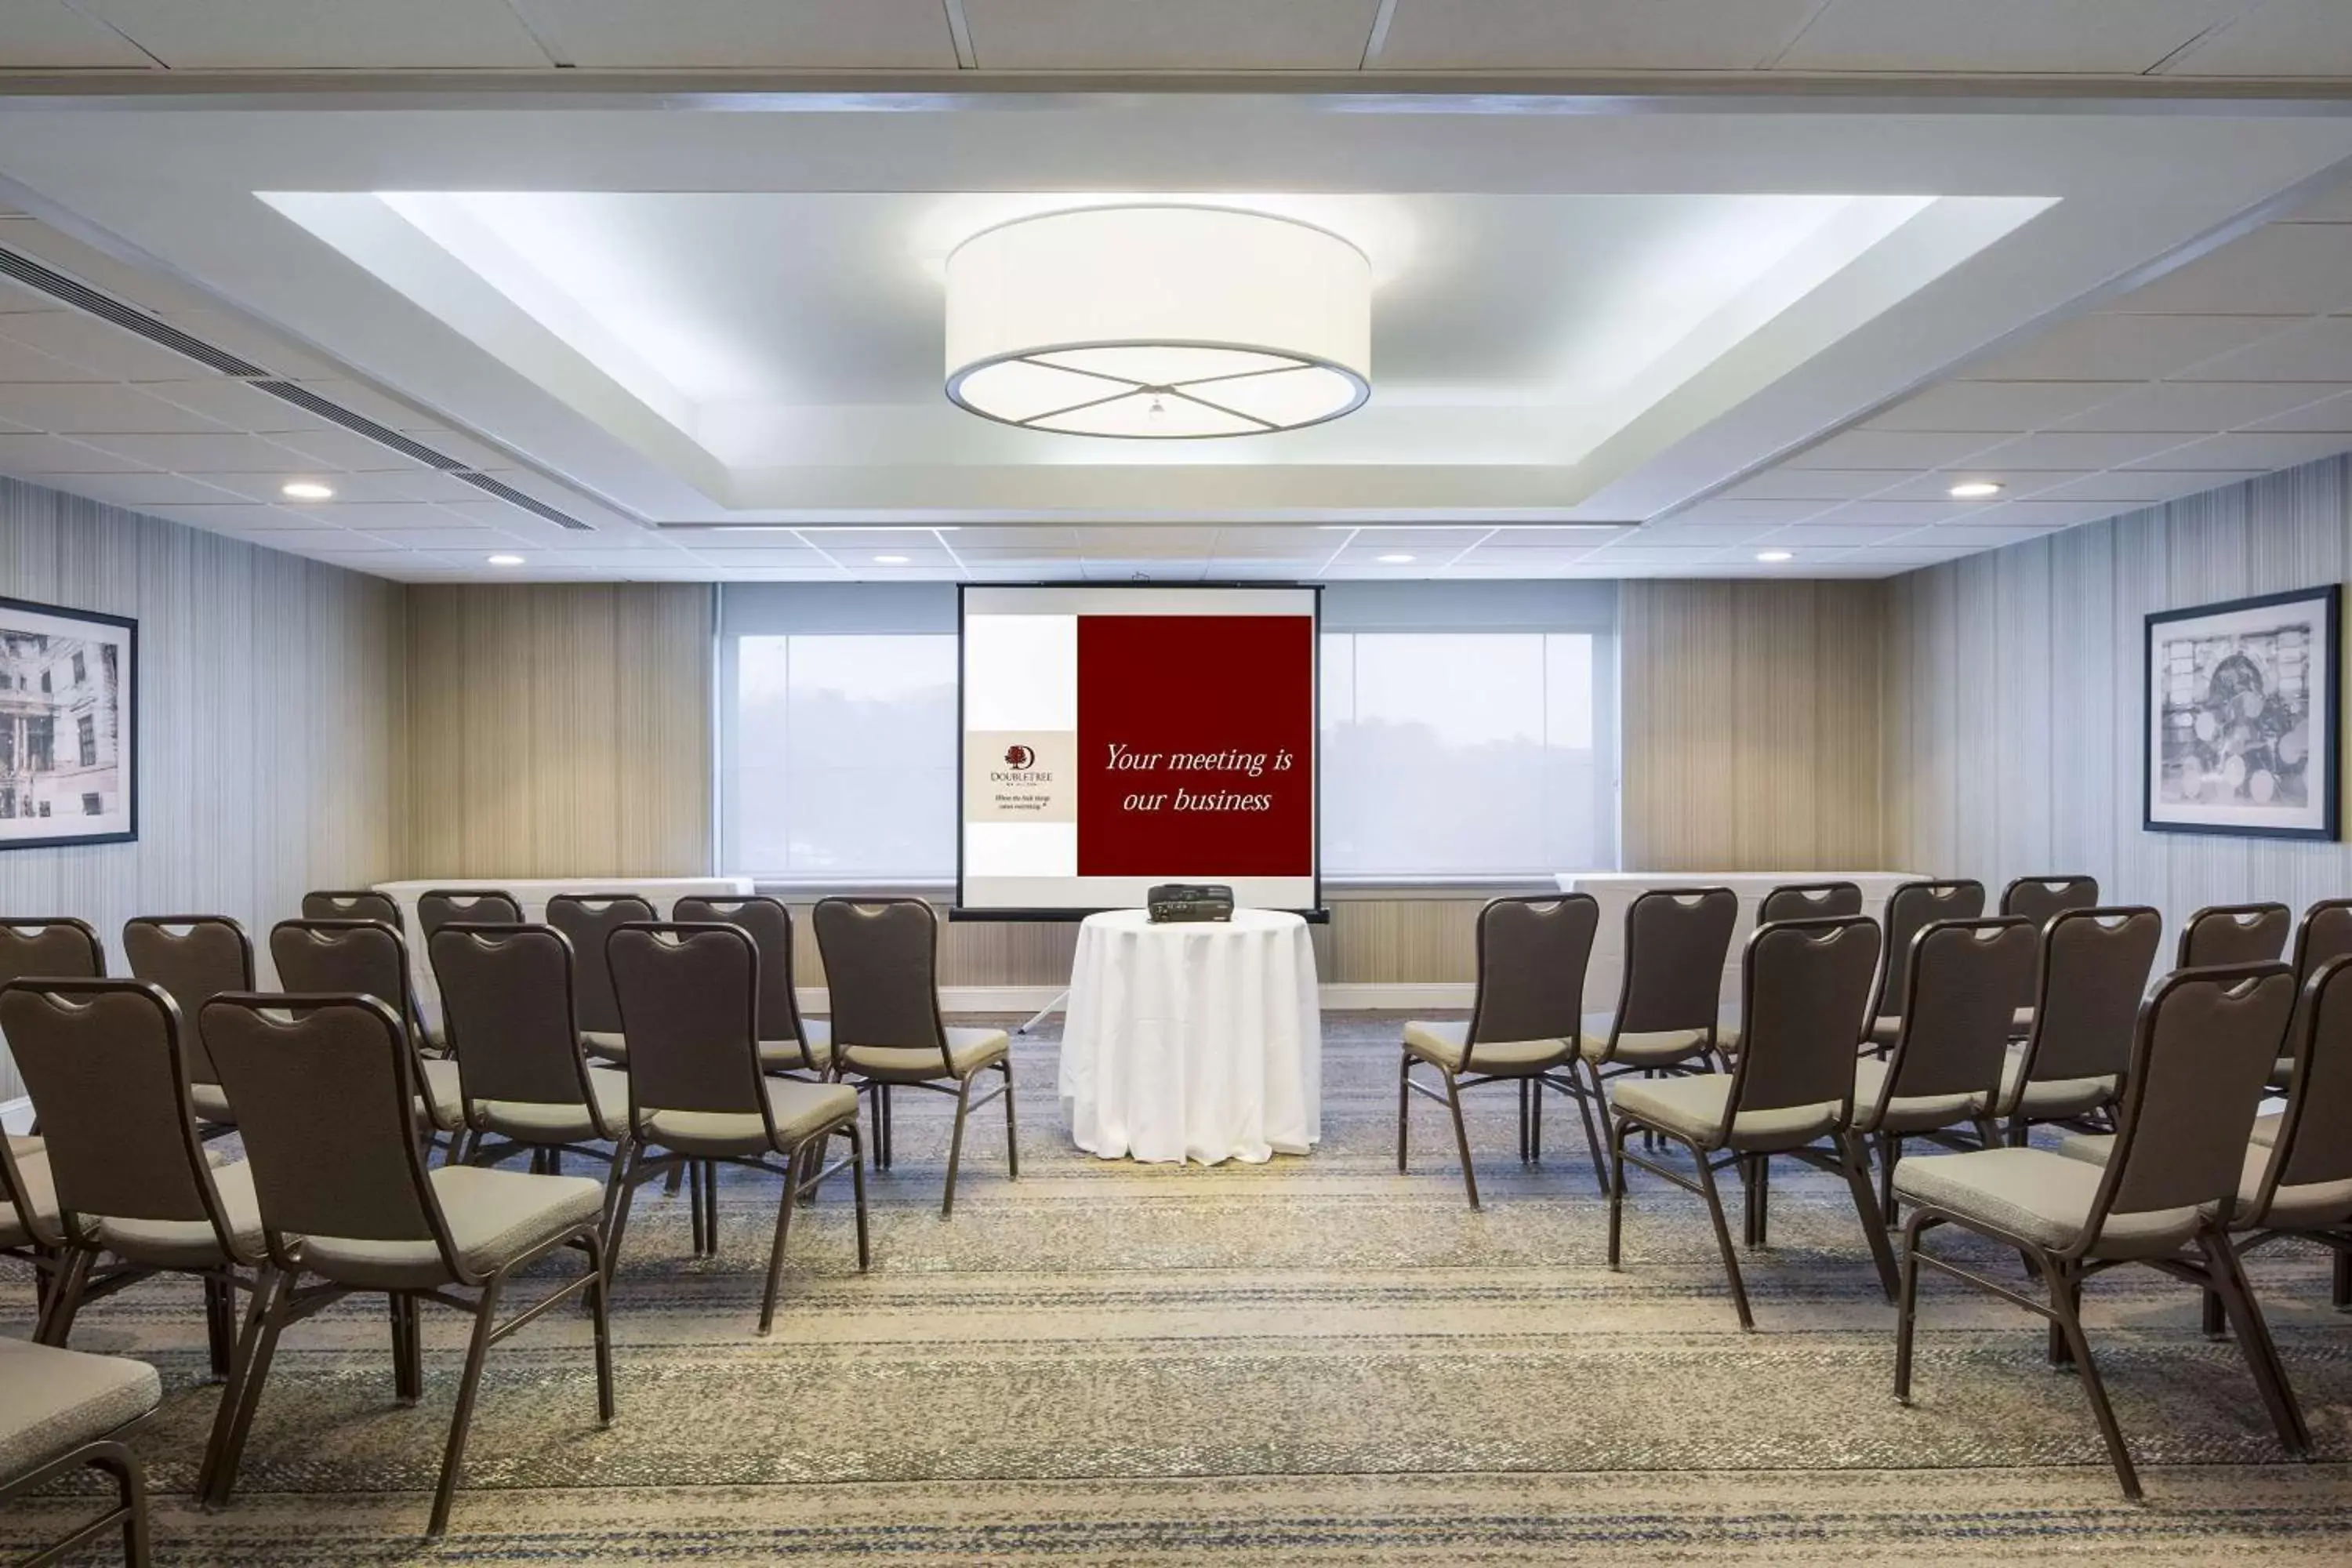 Meeting/conference room in Doubletree by Hilton Laurel, MD